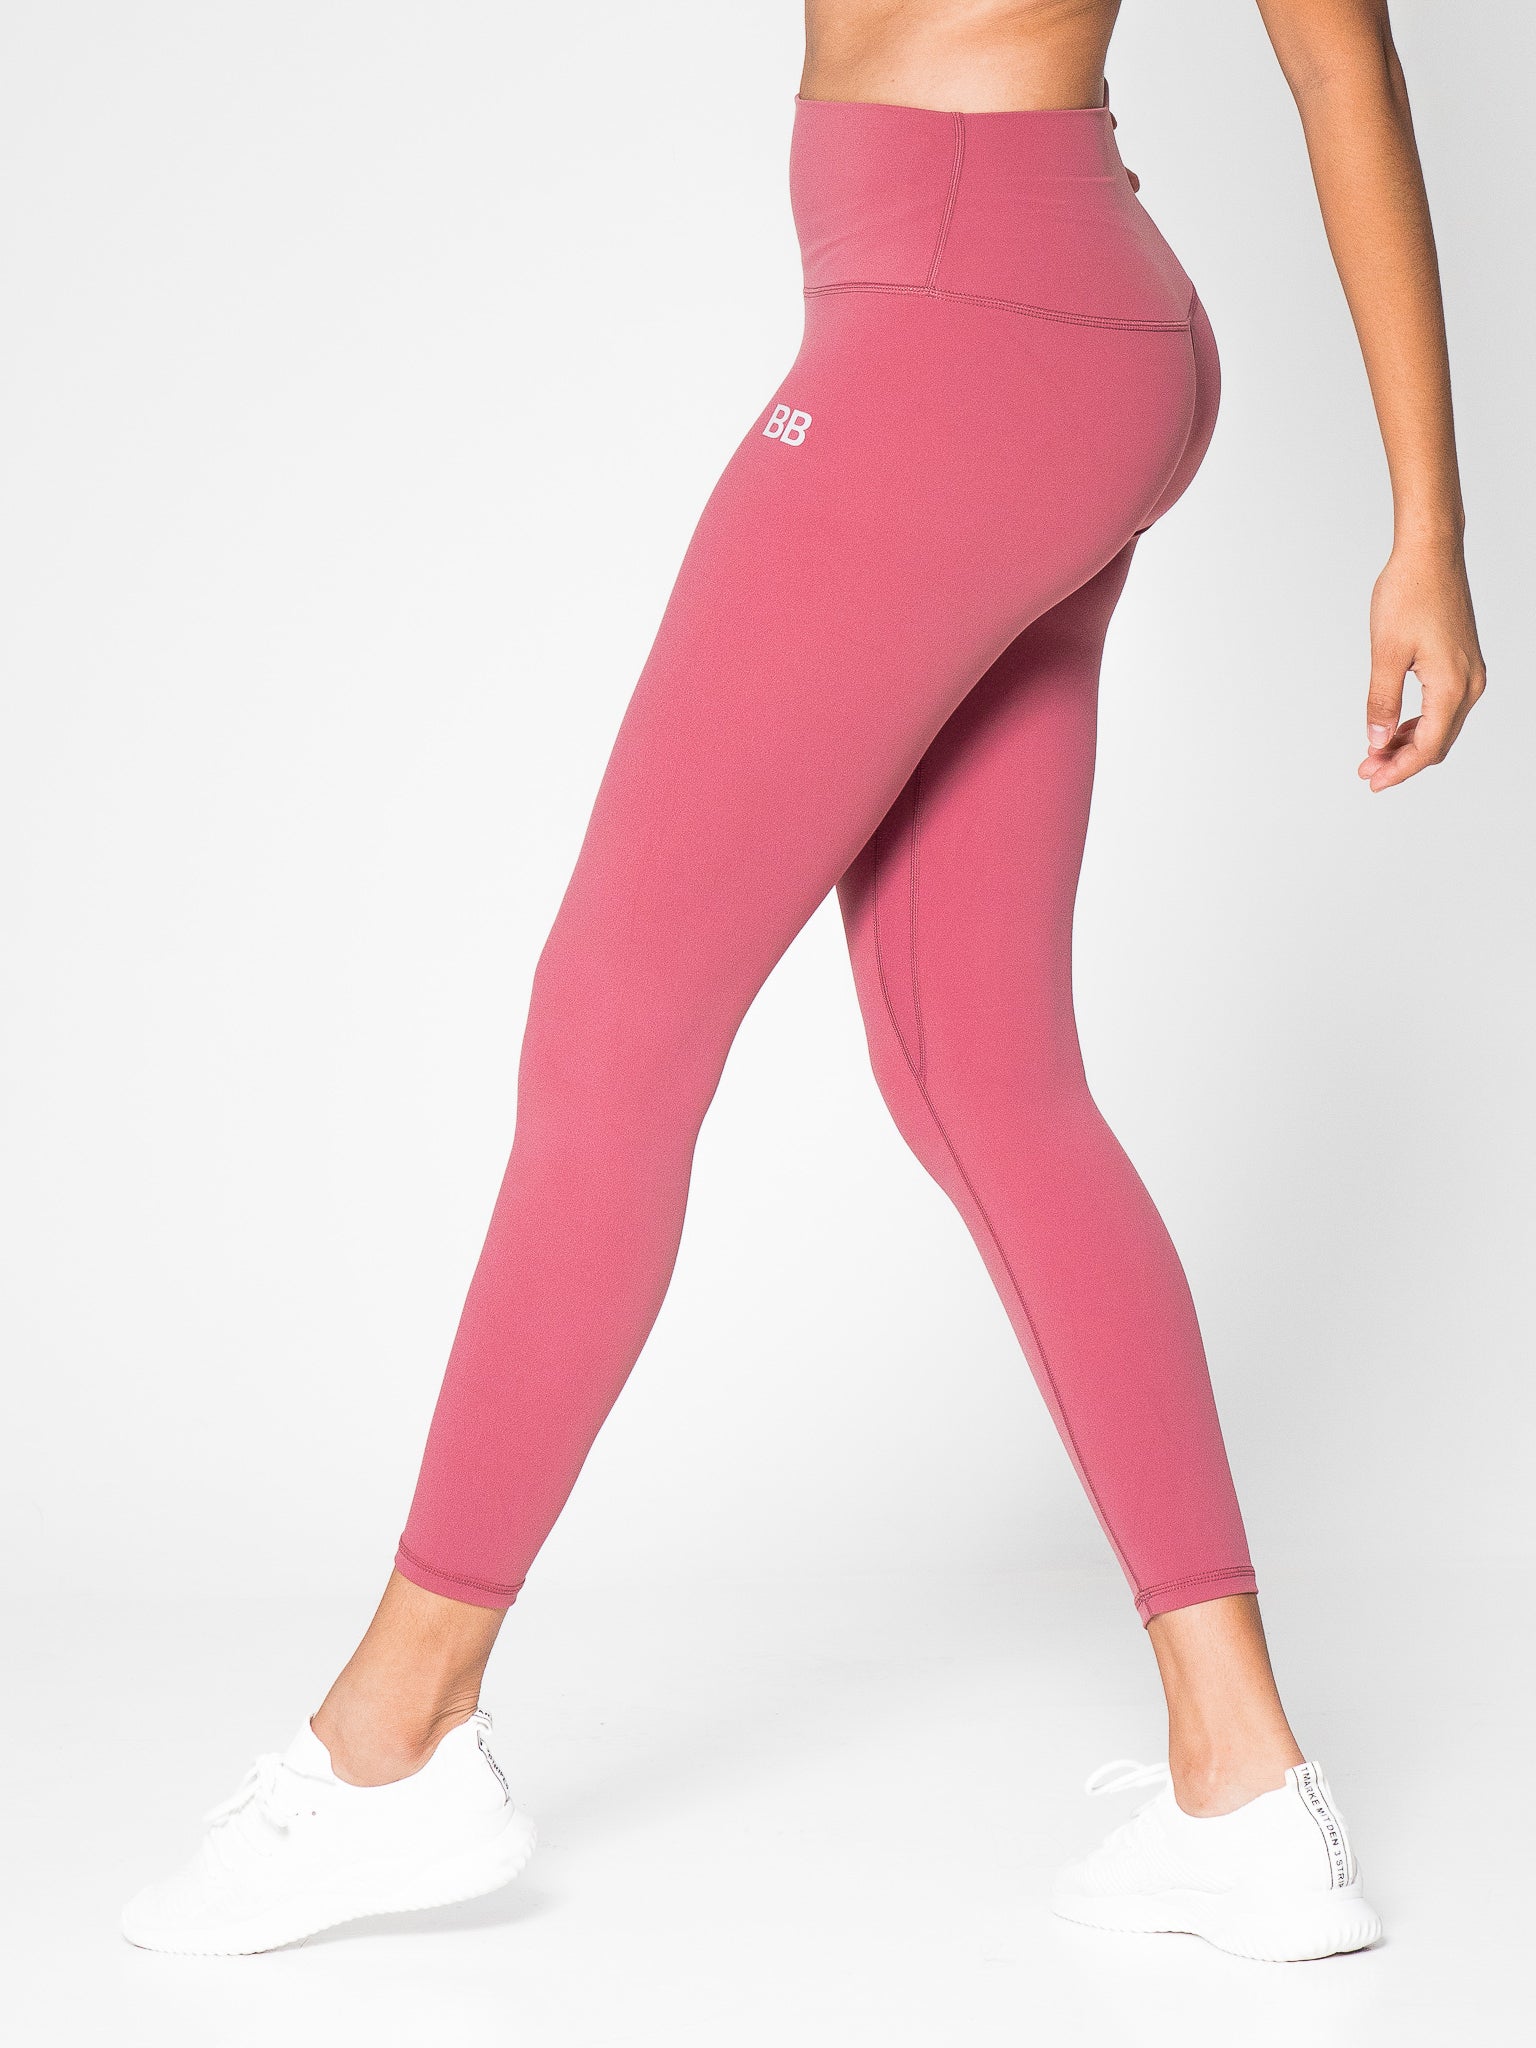 Spry Tights - Rosey